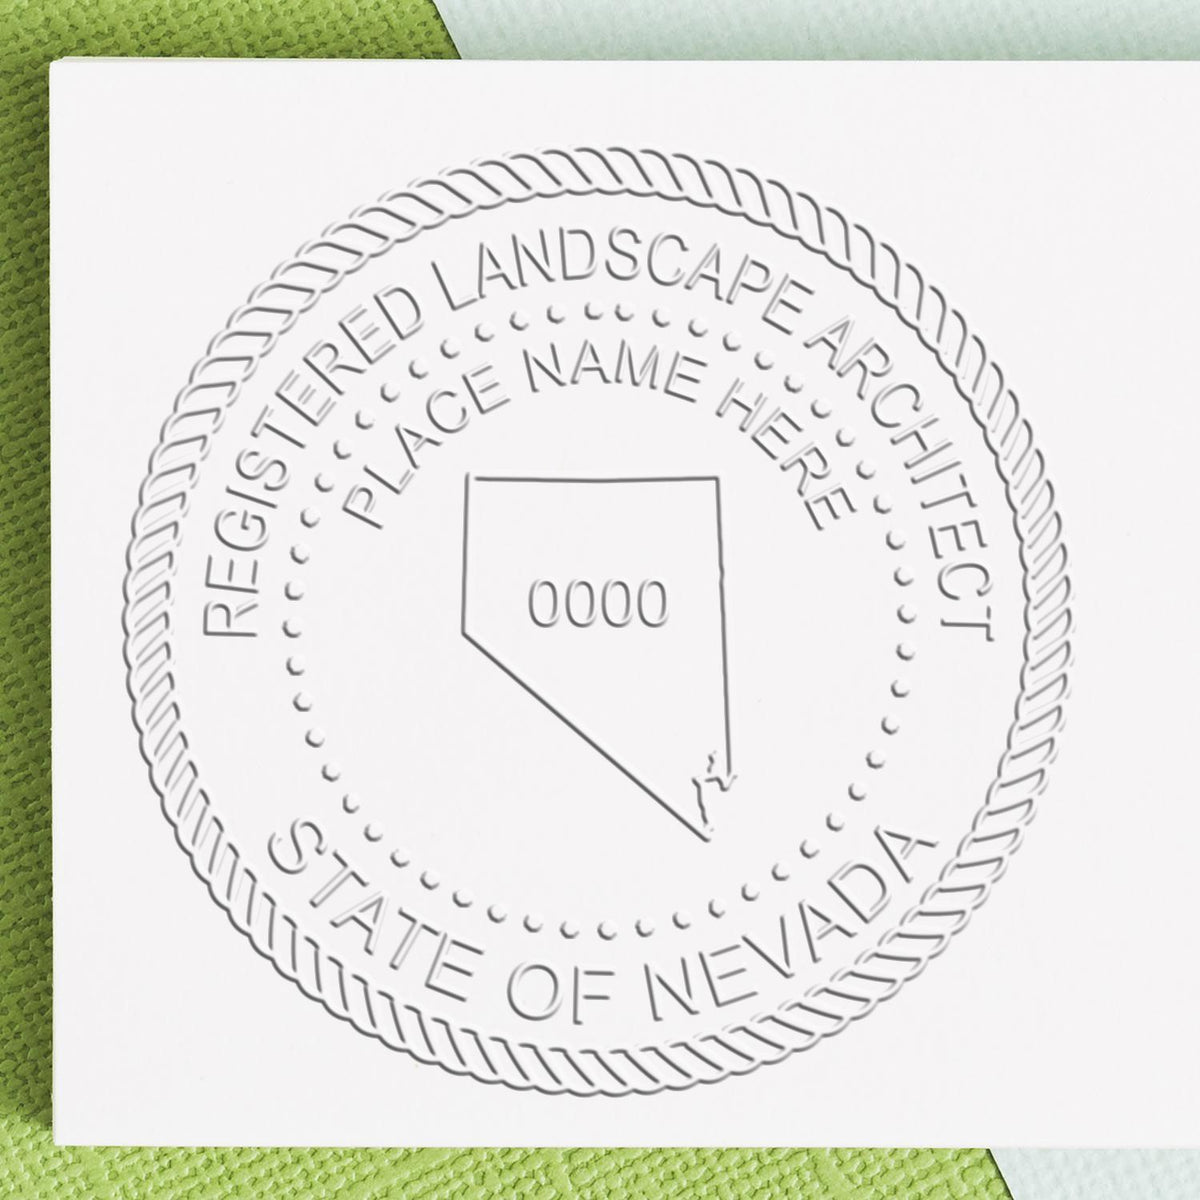 An in use photo of the Hybrid Nevada Landscape Architect Seal showing a sample imprint on a cardstock